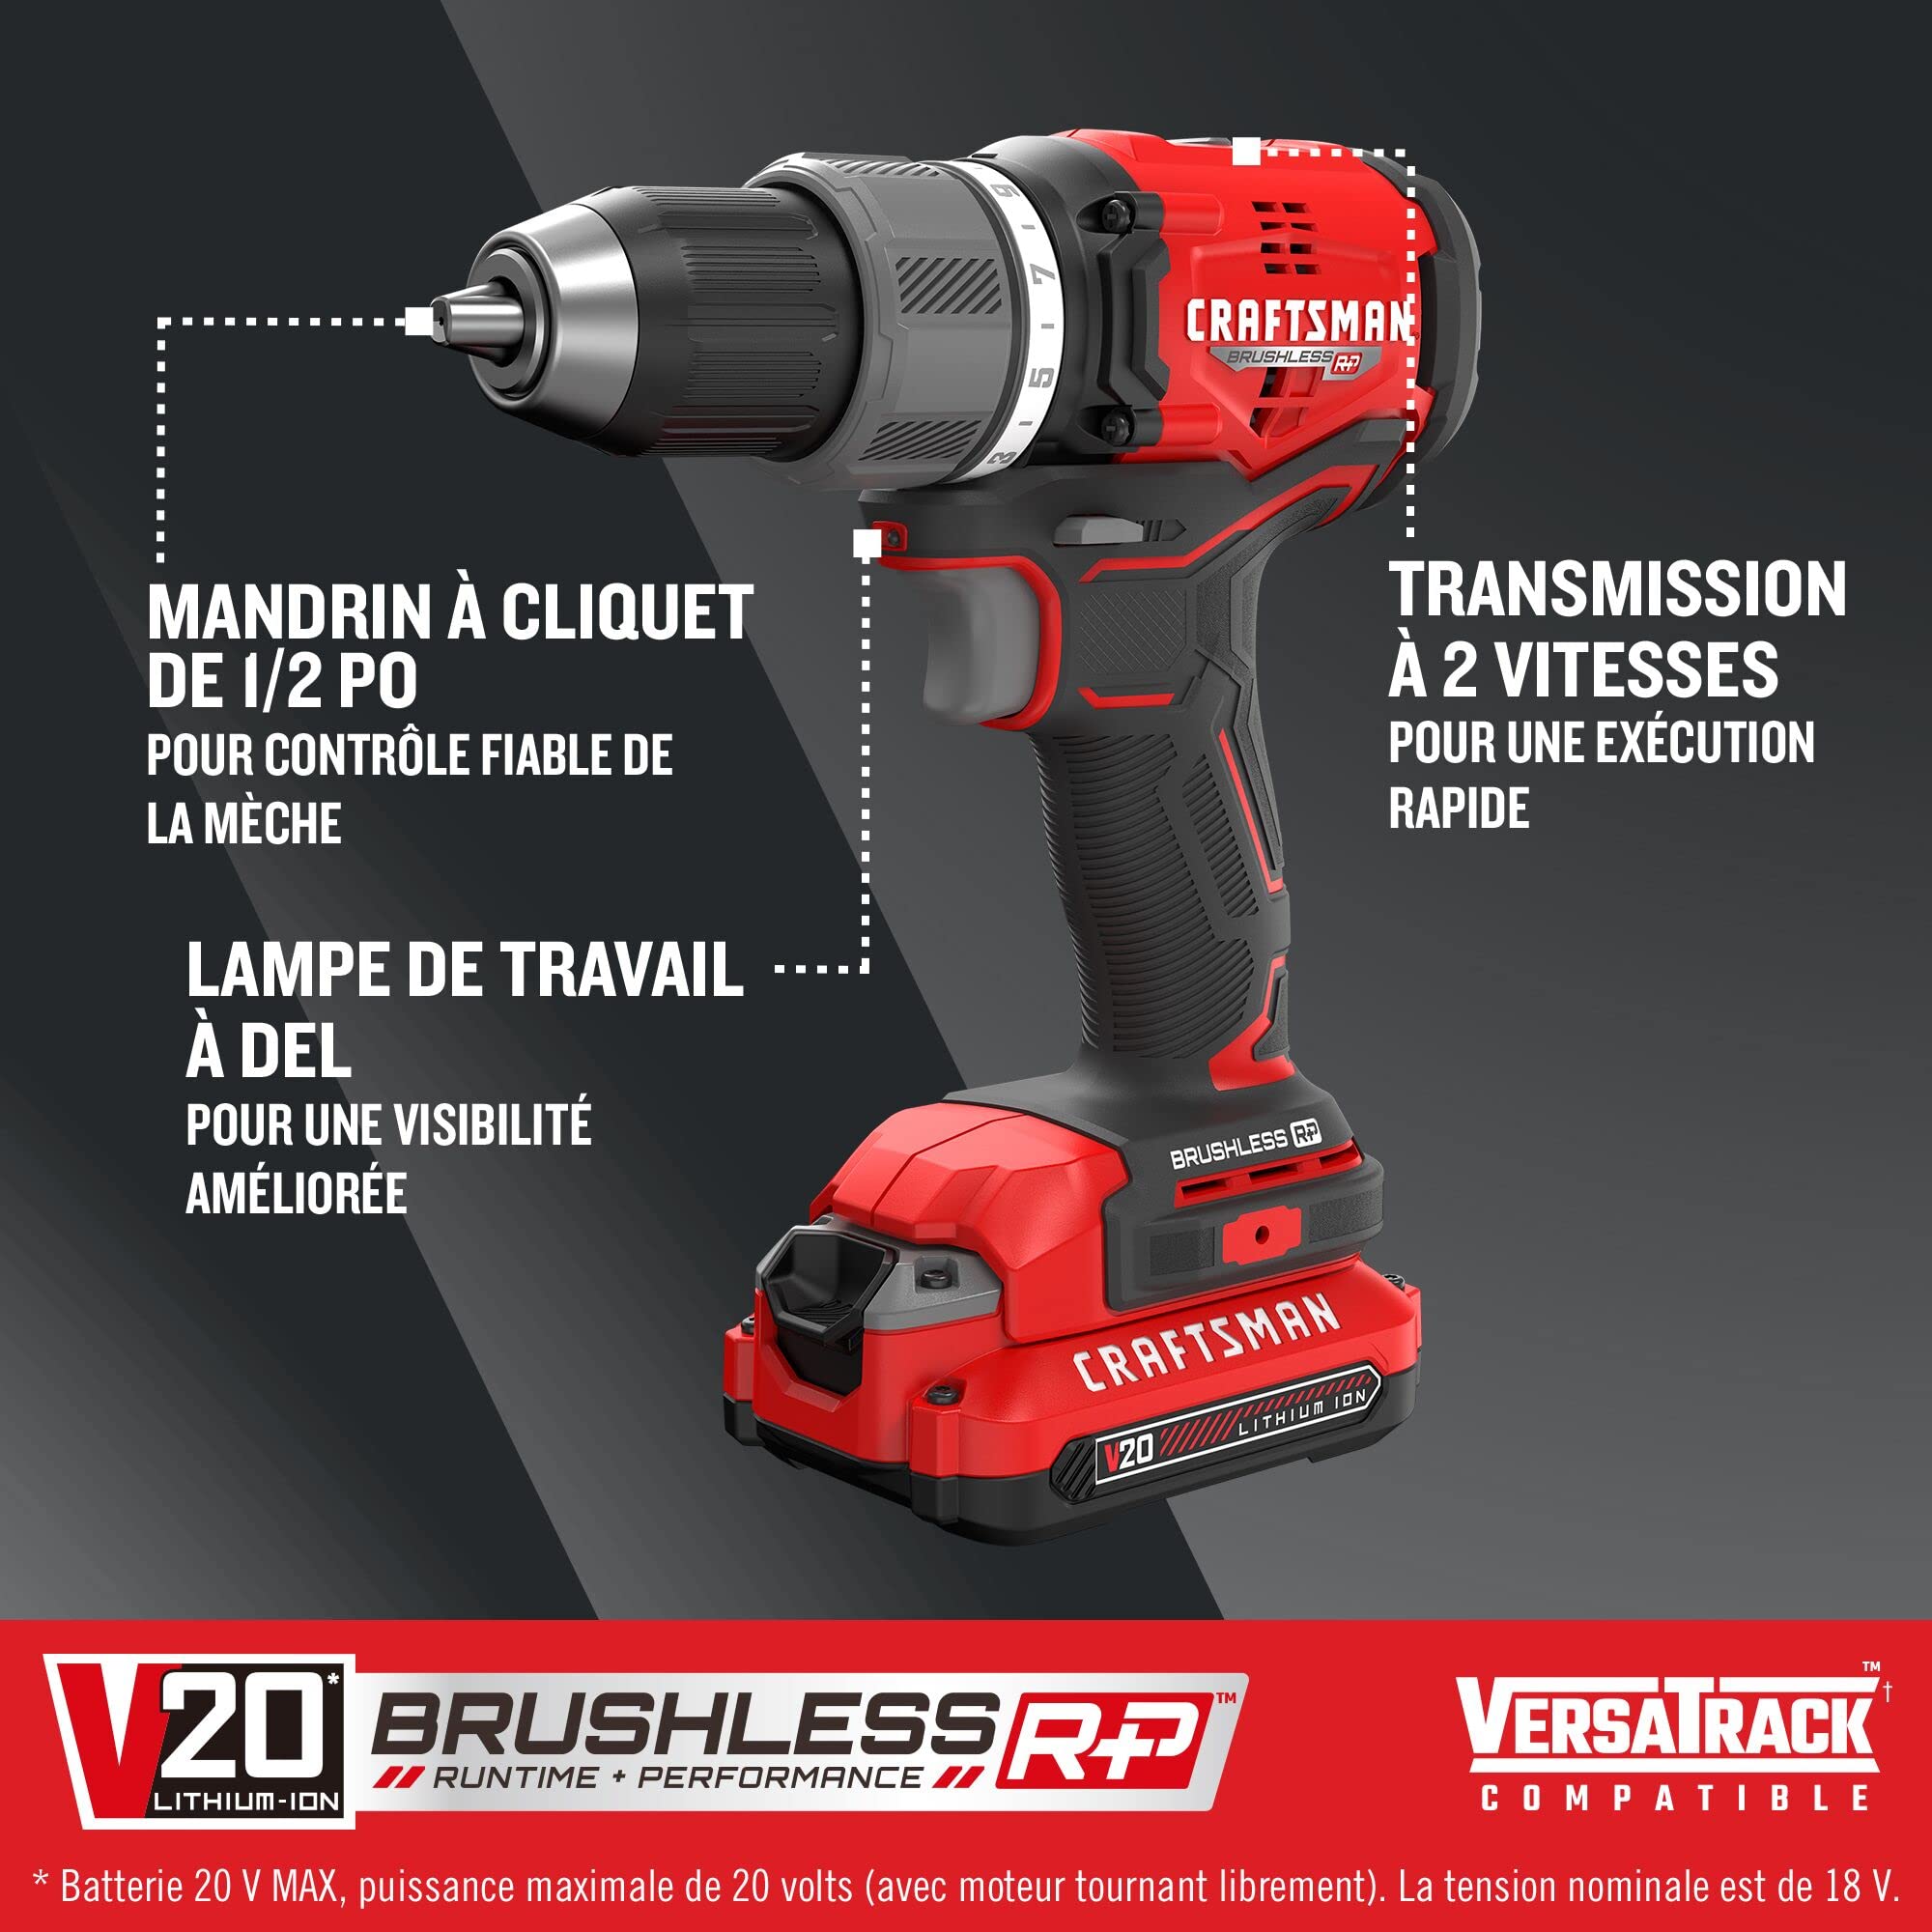 CRAFTSMAN RP+ Cordless Drill/Driver Kit, with 2 Batteries and Charger, Brushless (CMCD713C2)